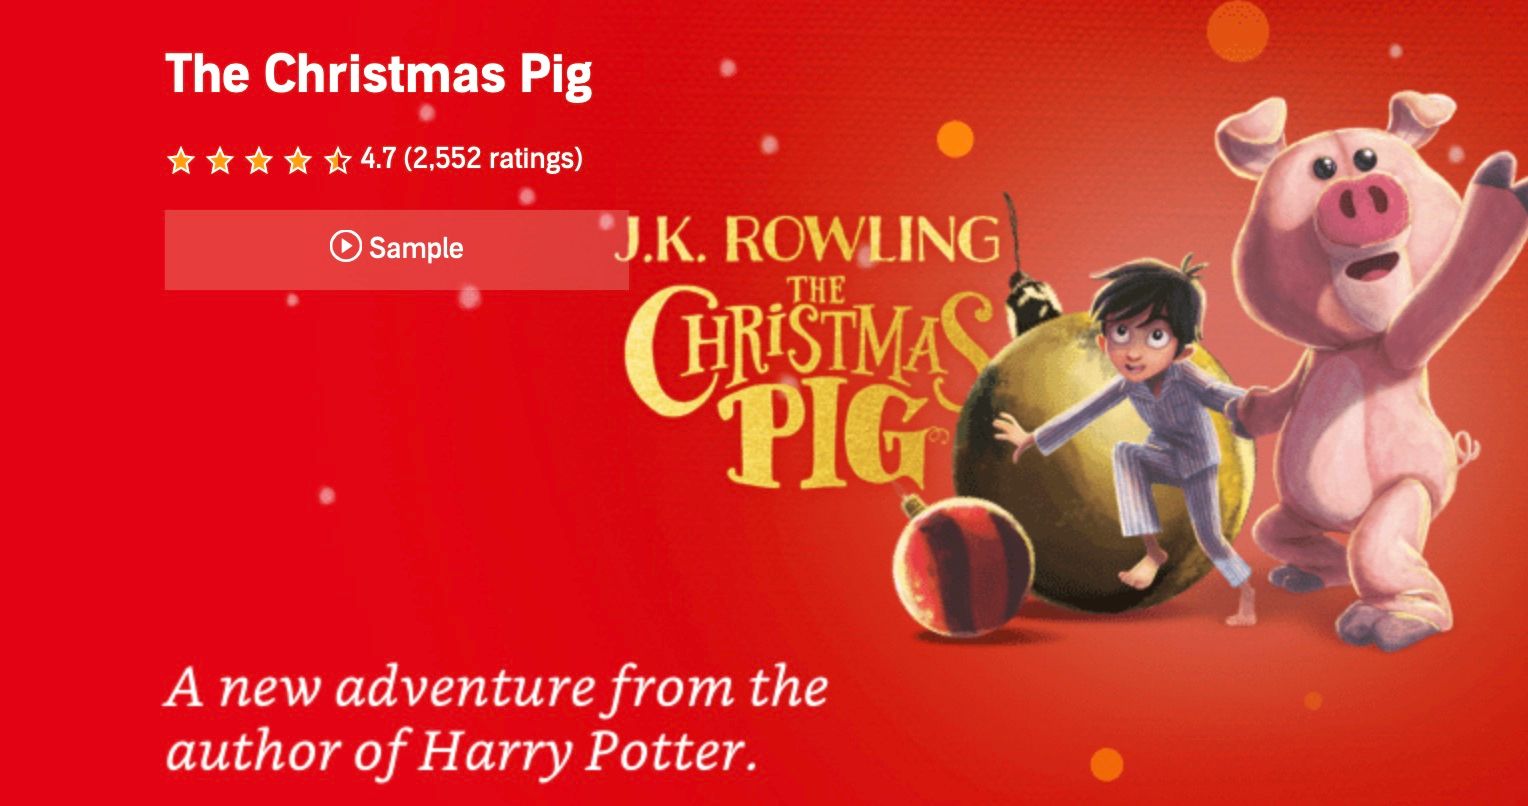 00004 Screenshot showing The Christmas Pig Audiobook from Audible